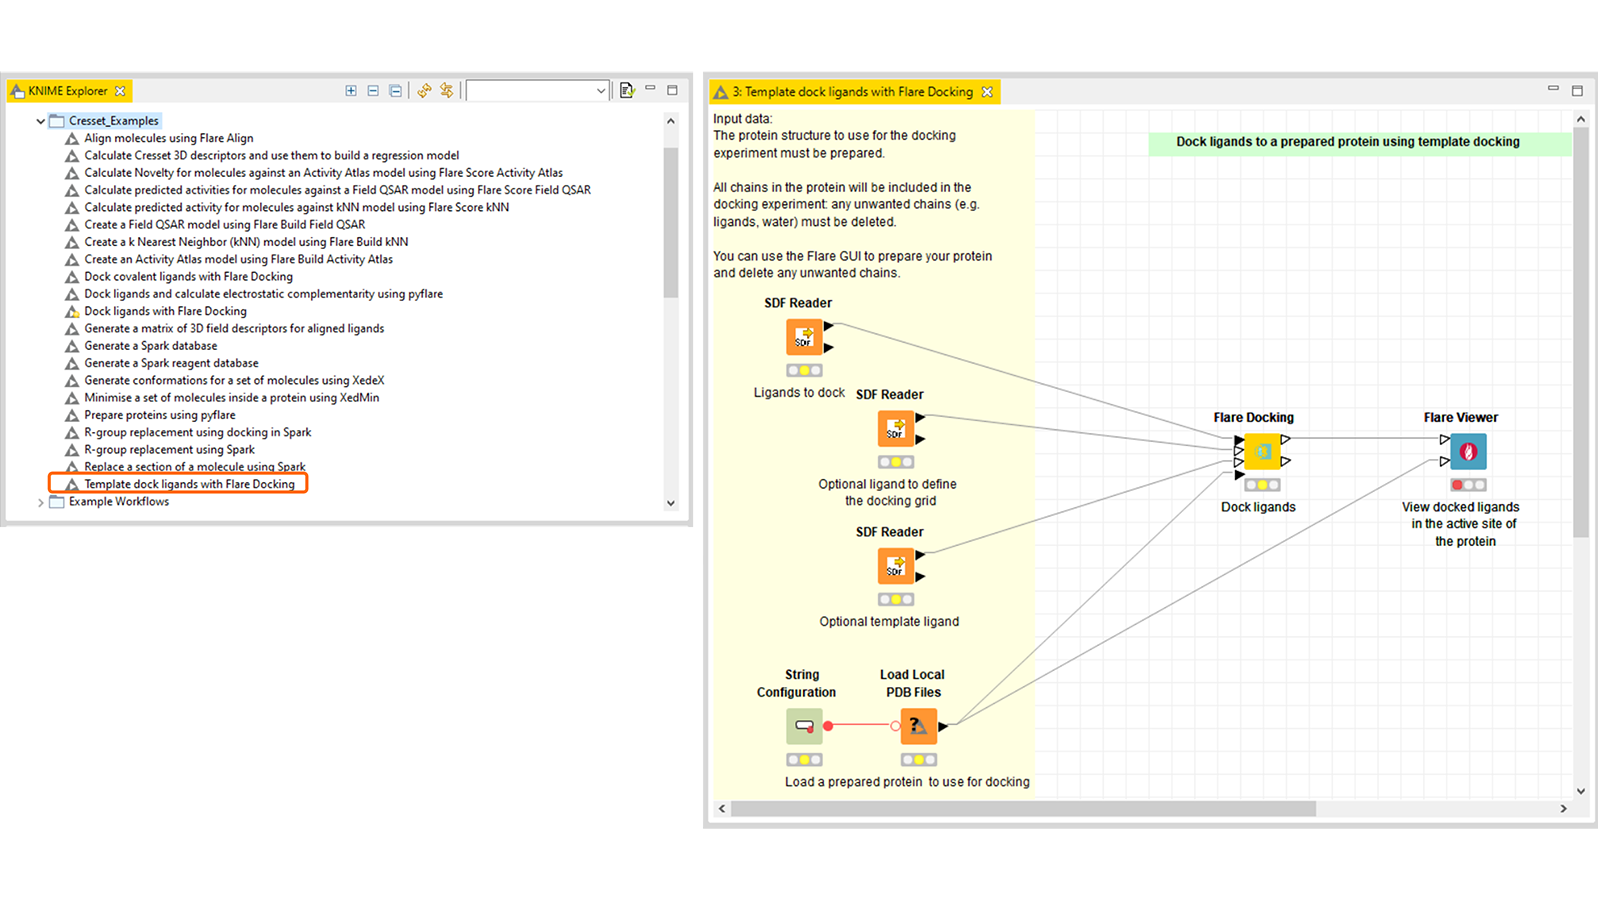 Flare_KNIME_new-enhanced-workflows